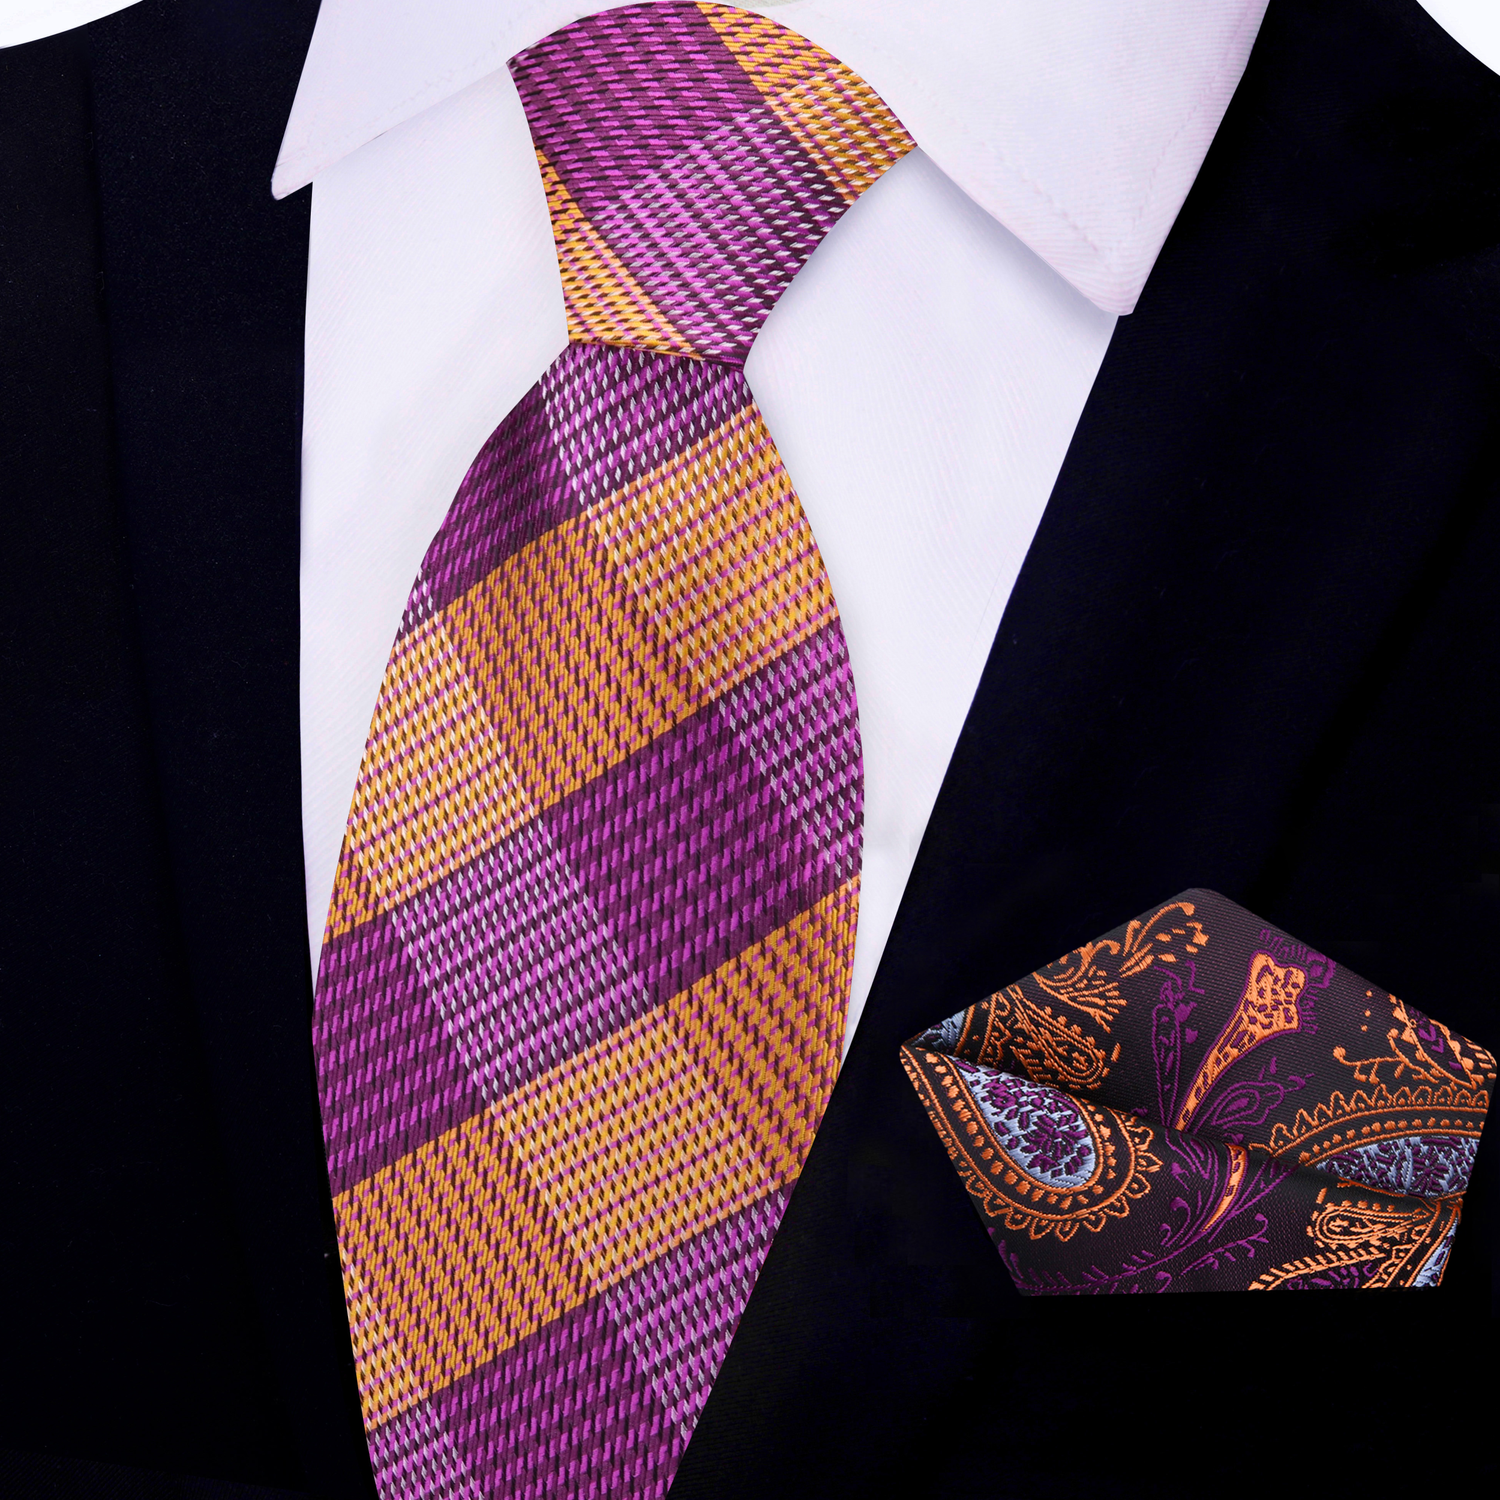 View 2: Purple and Orange Plaid Necktie and Accenting Purple and Orange Paisley Pocket Square